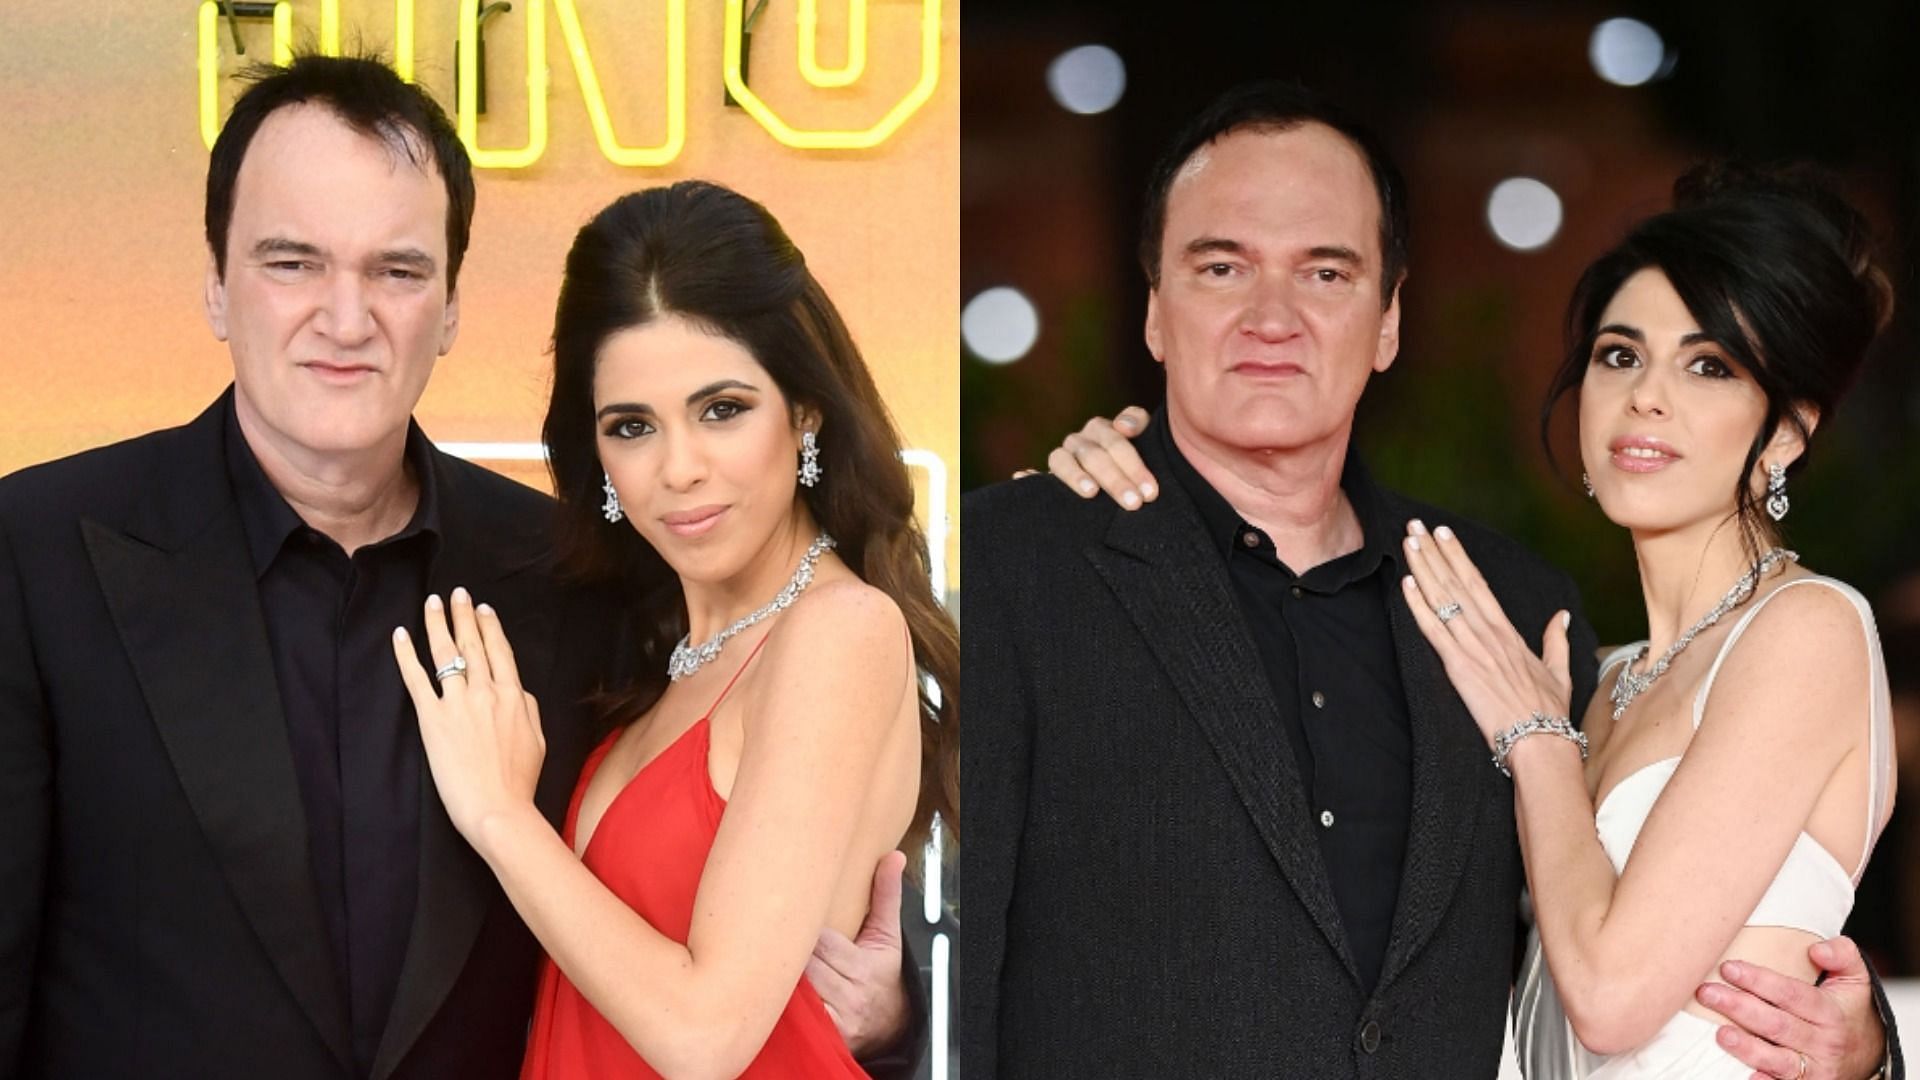 Quentin Tarantino and Daniella Pick are expecting to welcome their second child together (Image via Gareth Cattermole/Getty Images and Daniele Venturelli/WireImage)